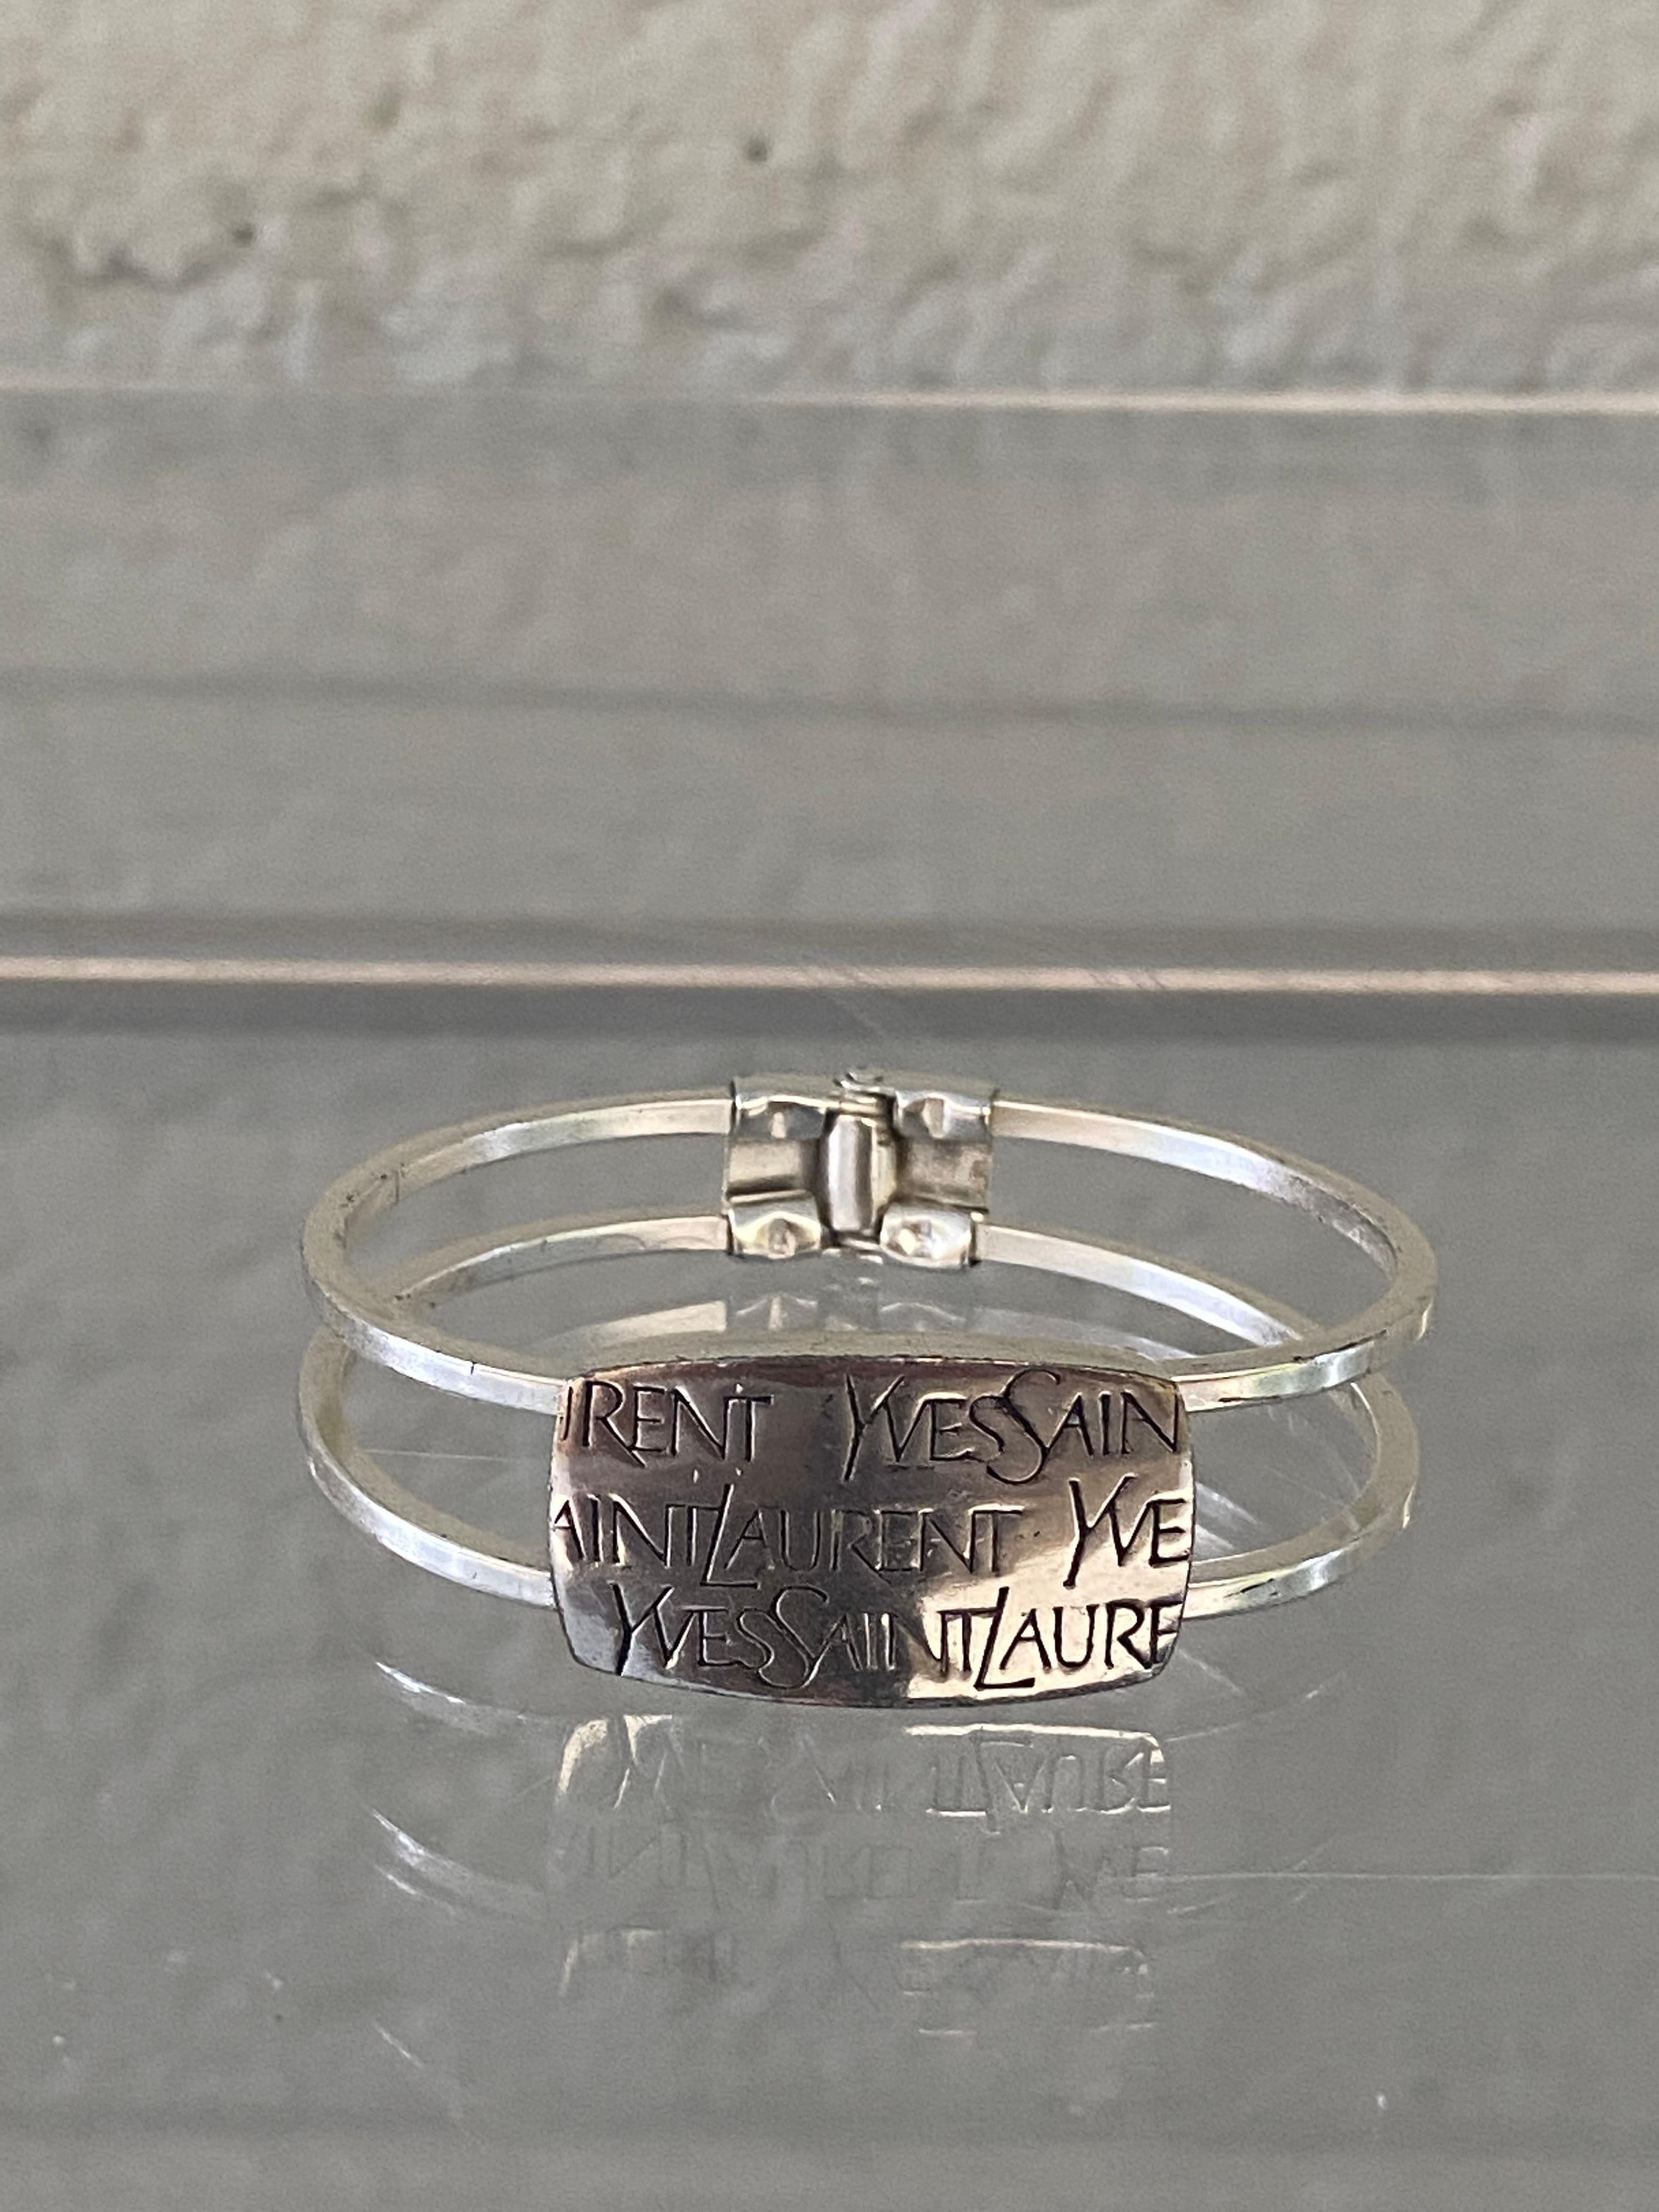 This collectable bangle bracelet from YSL collection is made to a fine finish using silver-tone metal. Logo's are in engraved. Classic statement piece.